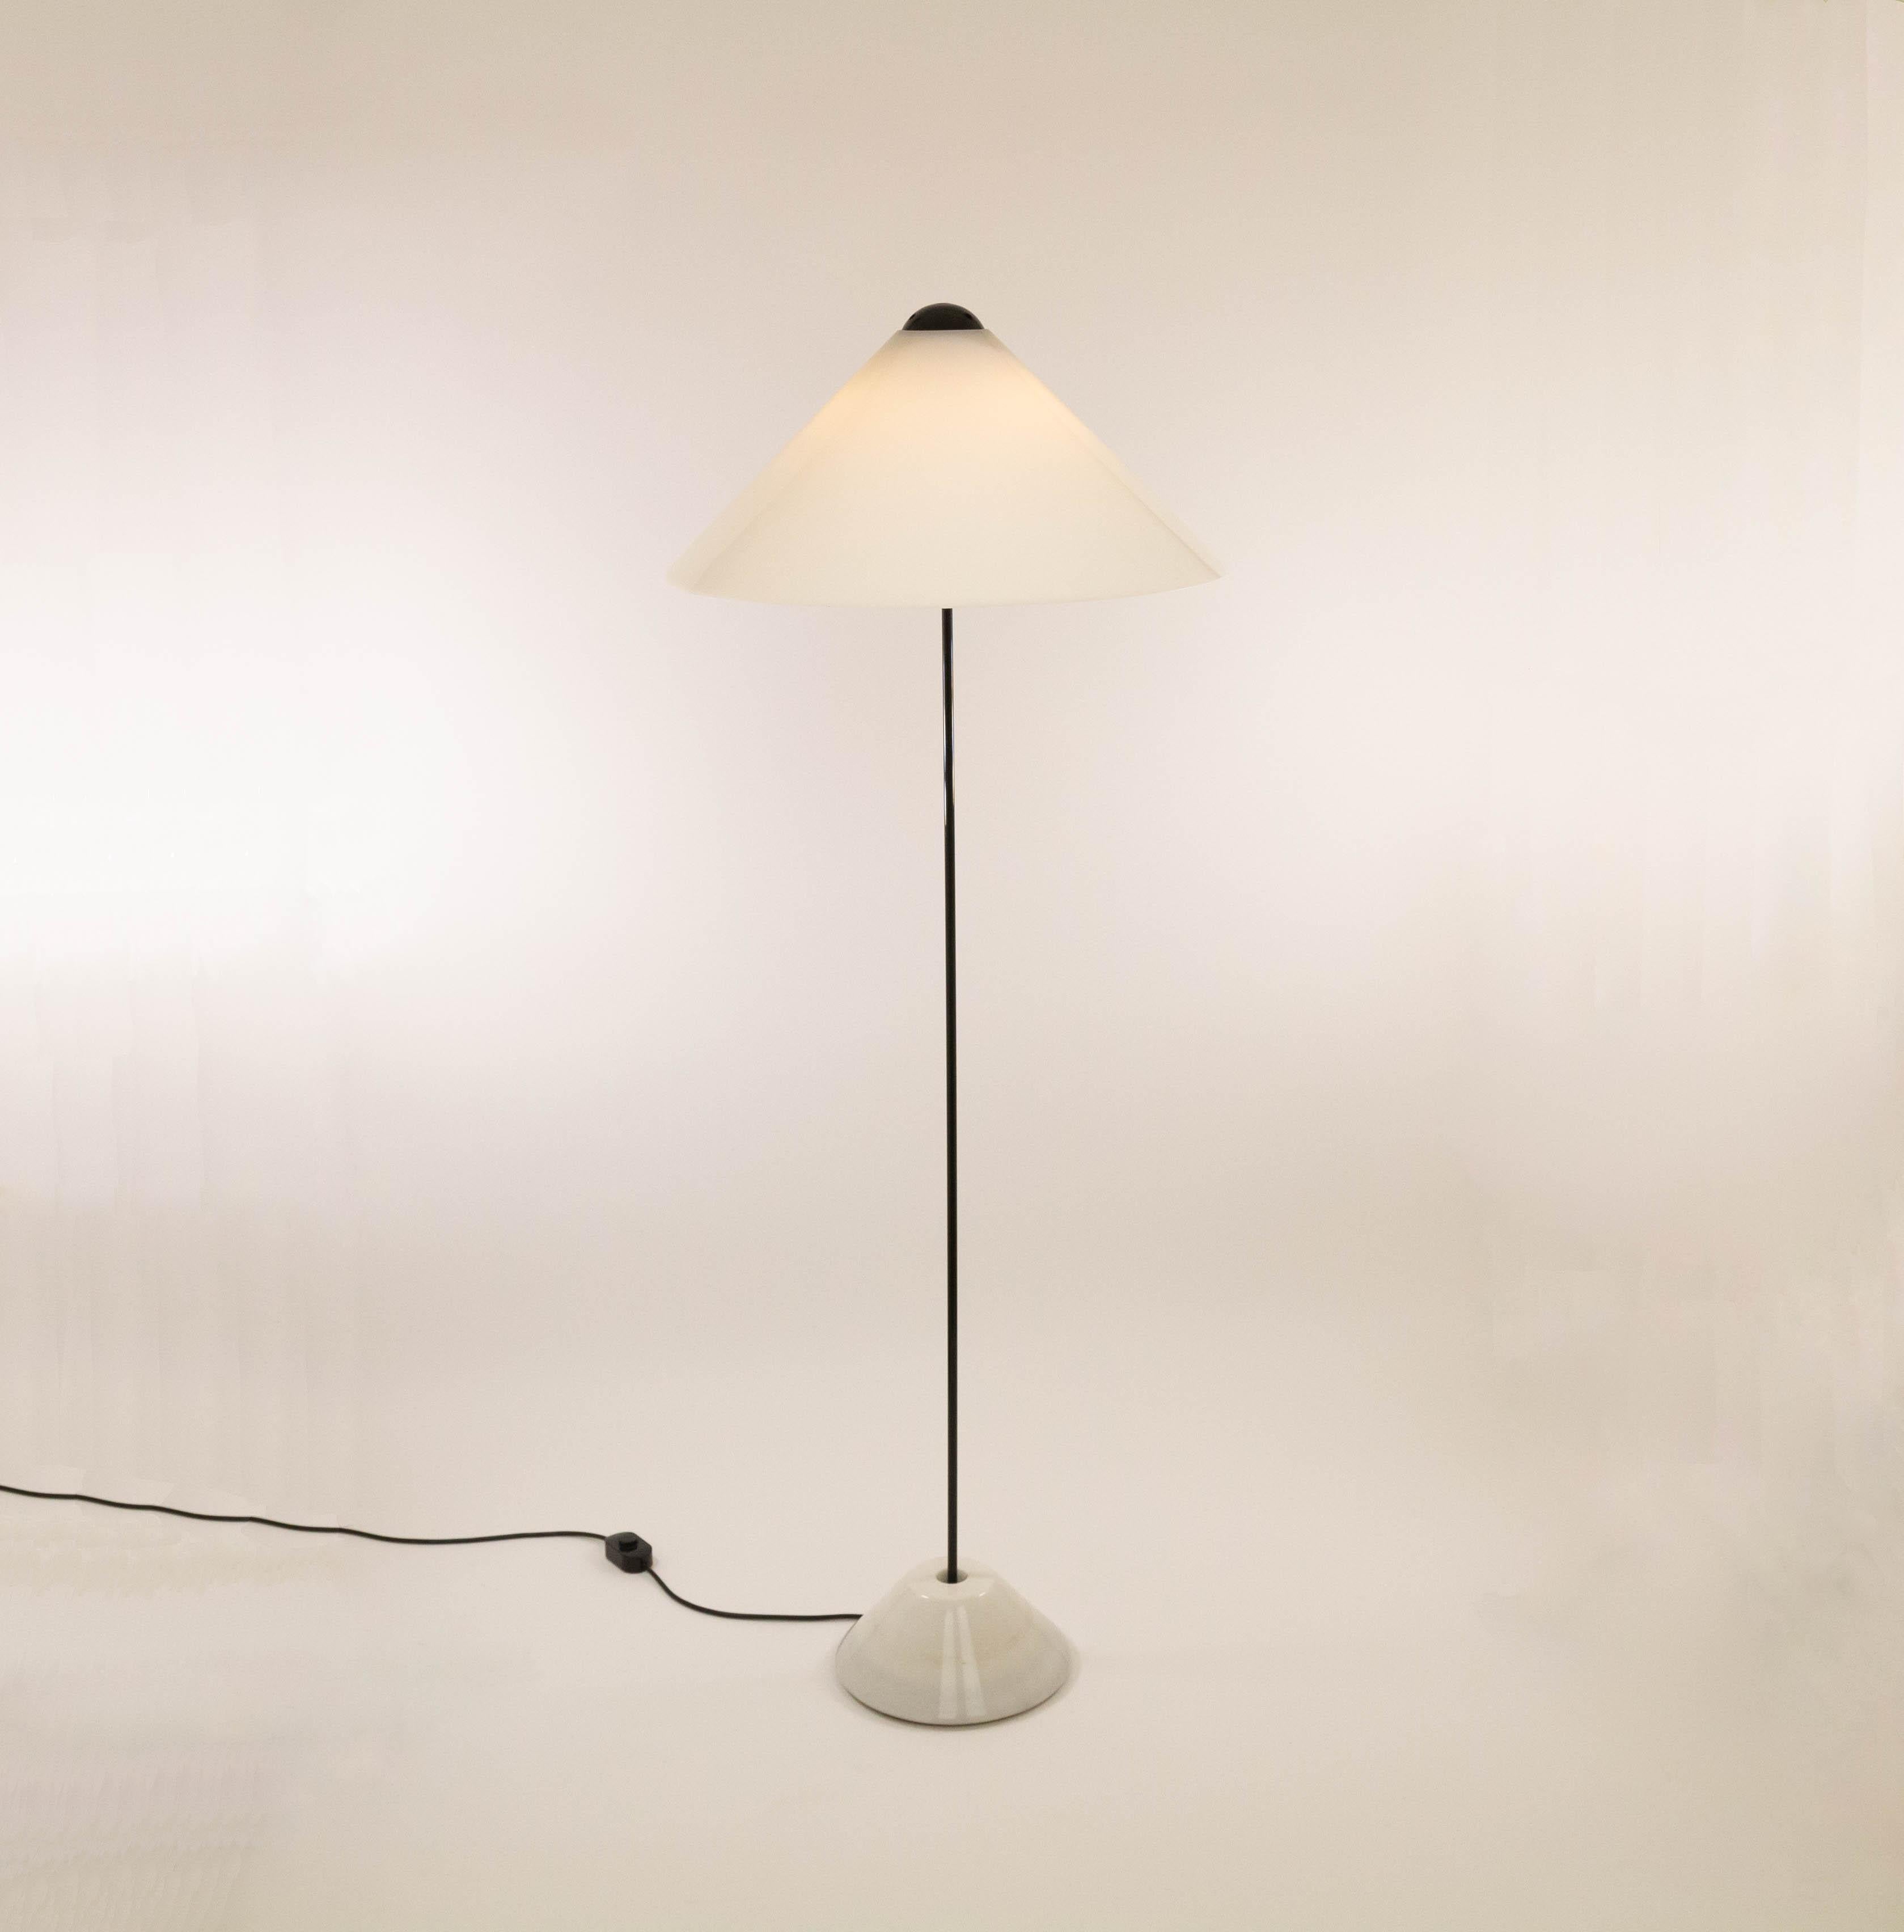 Snow 301/C floor lamp designed by Vico Magistretti and manufactured by O-luce in 1973.

This floor lamp is part of the Snow series, consisting of a pendant, table lamp and this floor lamp. According to Archivio Vico Magistretti: 